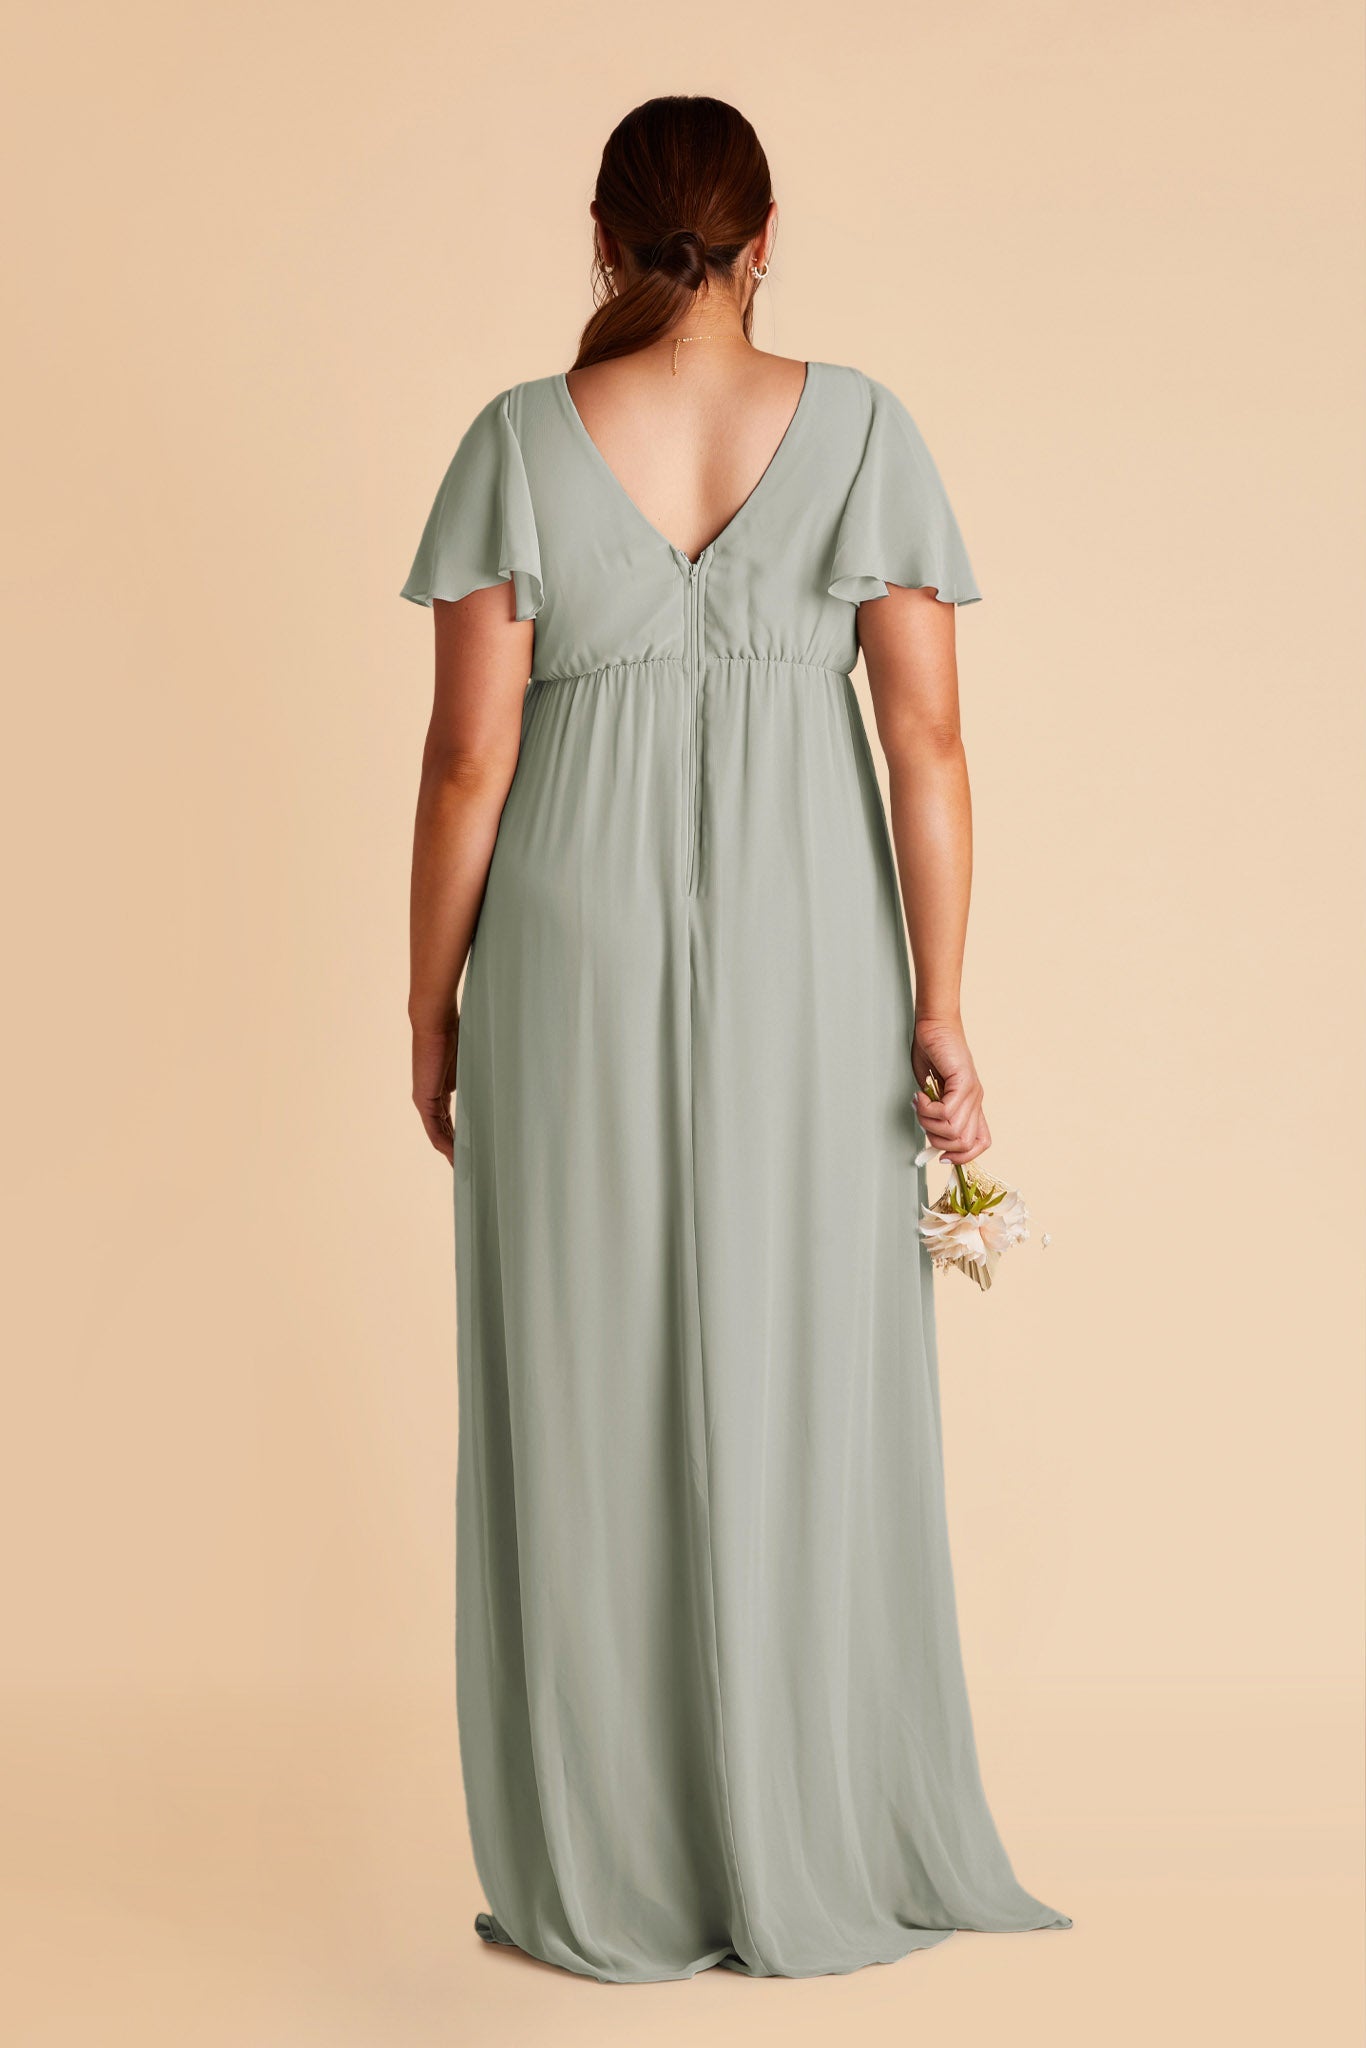 Hannah empire plus size bridesmaid dress in sage green chiffon by Birdy Grey, back view